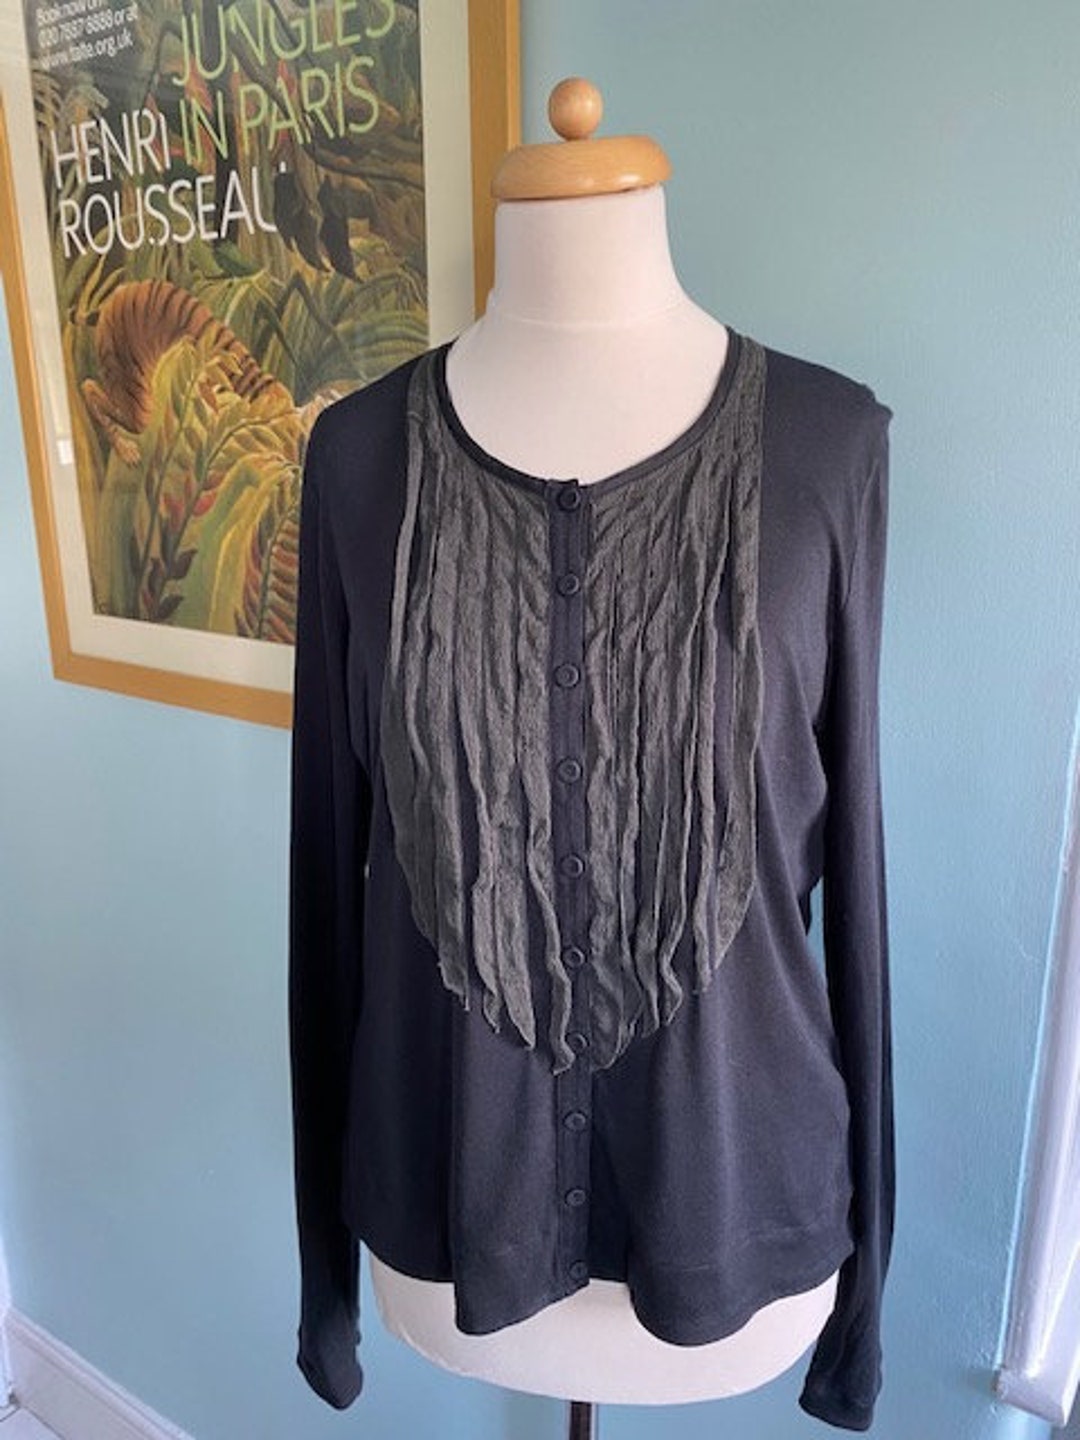 Vintage Noughties Elegant Black Silk and Cotton Top by Jigsaw. - Etsy UK